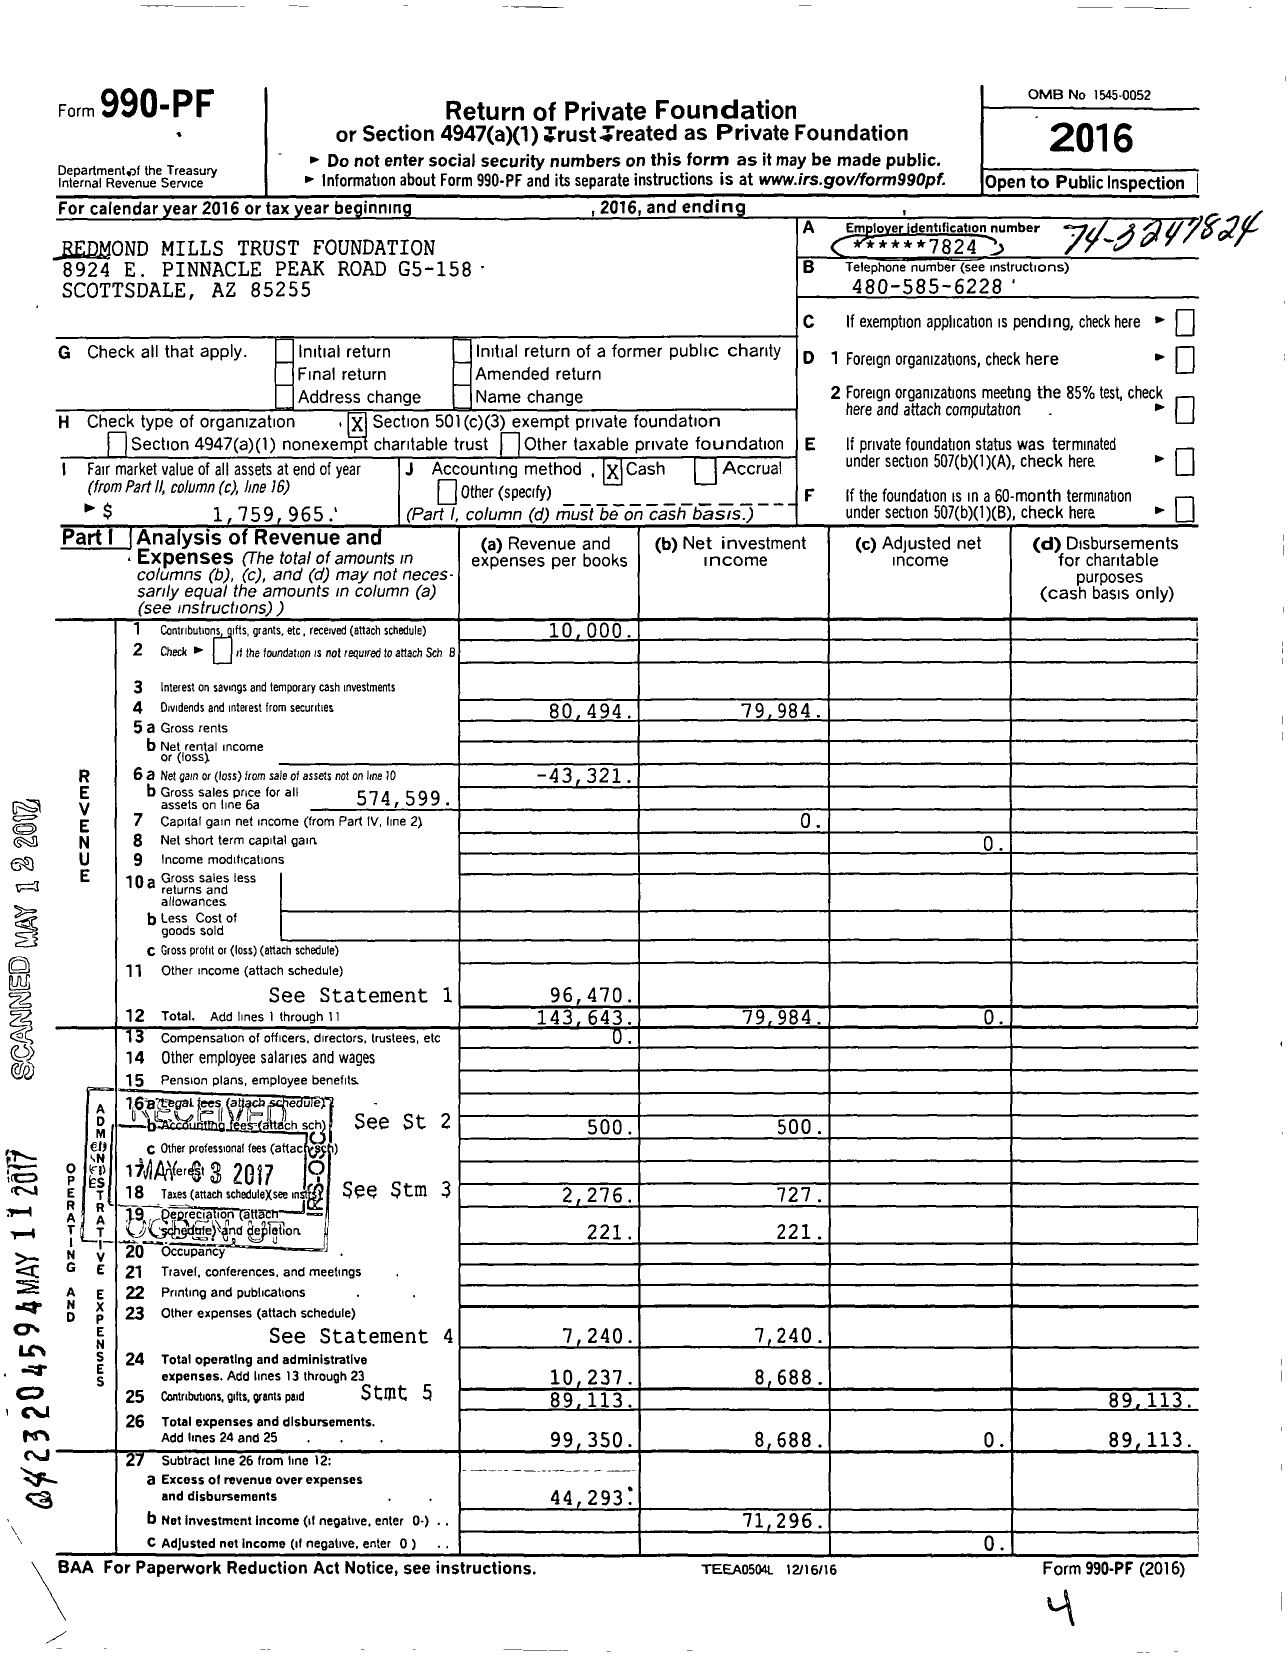 Image of first page of 2016 Form 990PF for Redmond Mills Trust Foundation